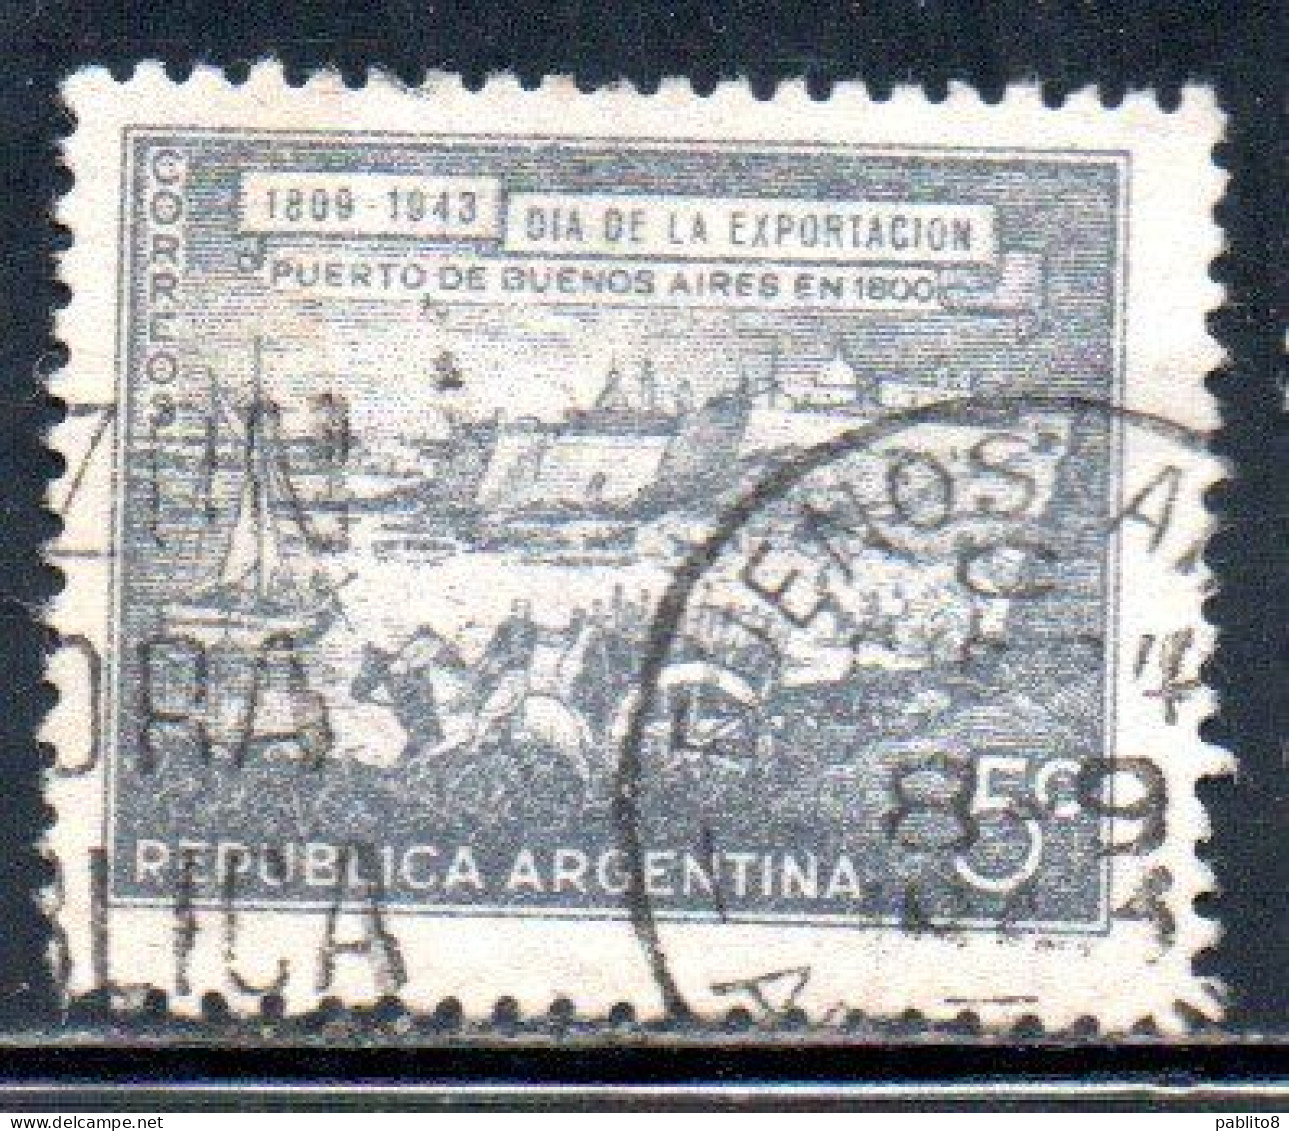 ARGENTINA 1943 DAY OF EXPORTS PORT OF BUENOS AIRES IN 1800  5c USED USADO OBLITERE' - Used Stamps